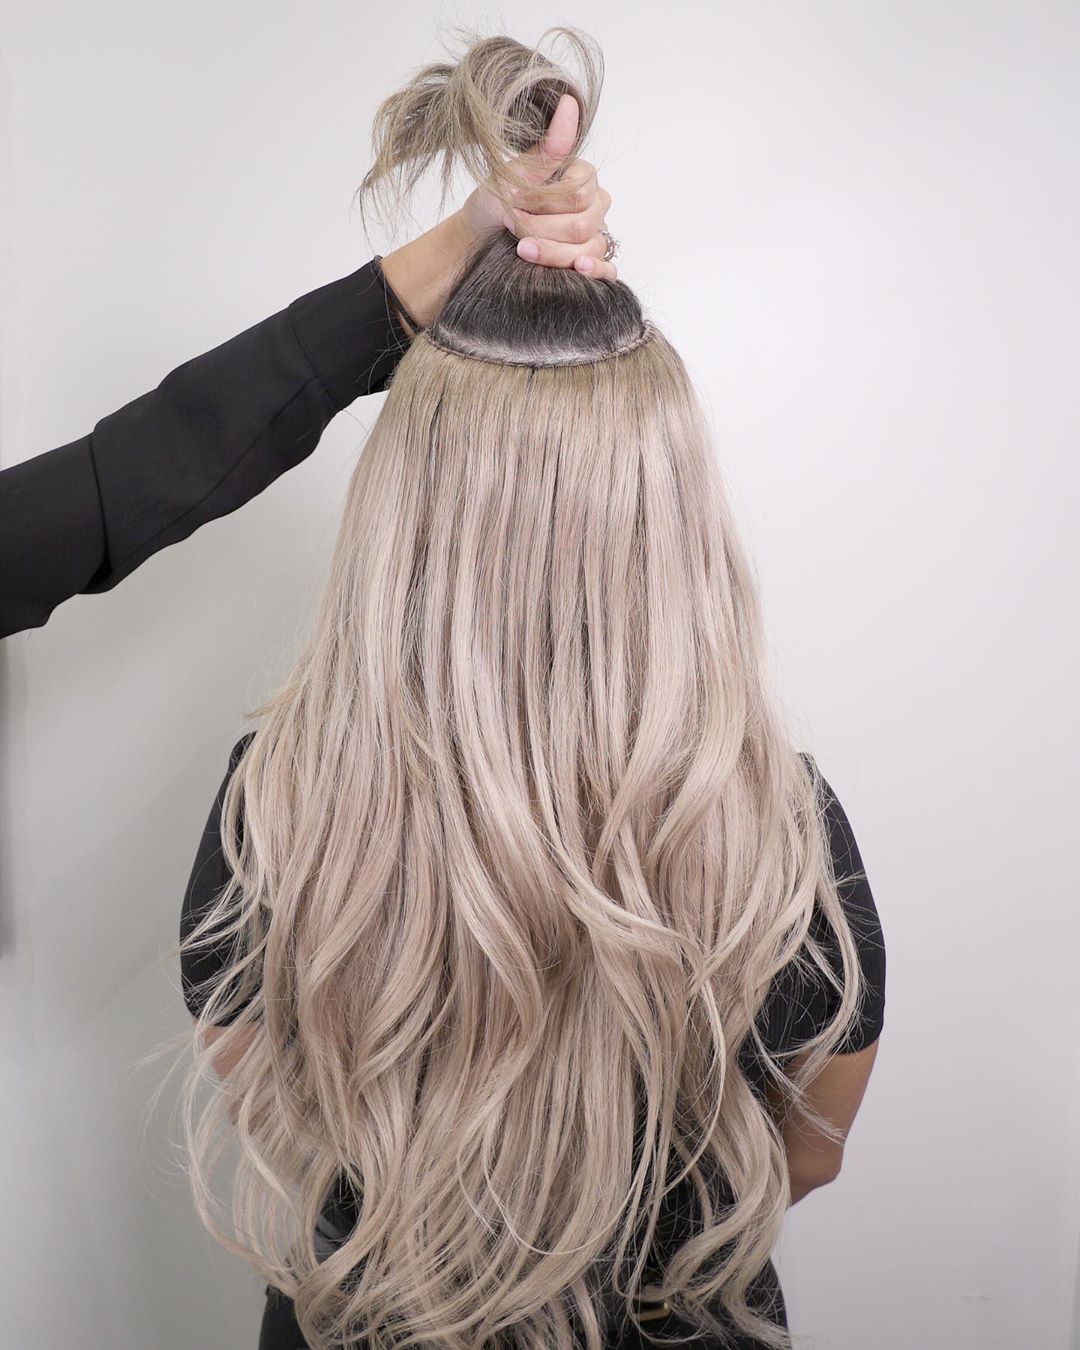 where to find hair extensions